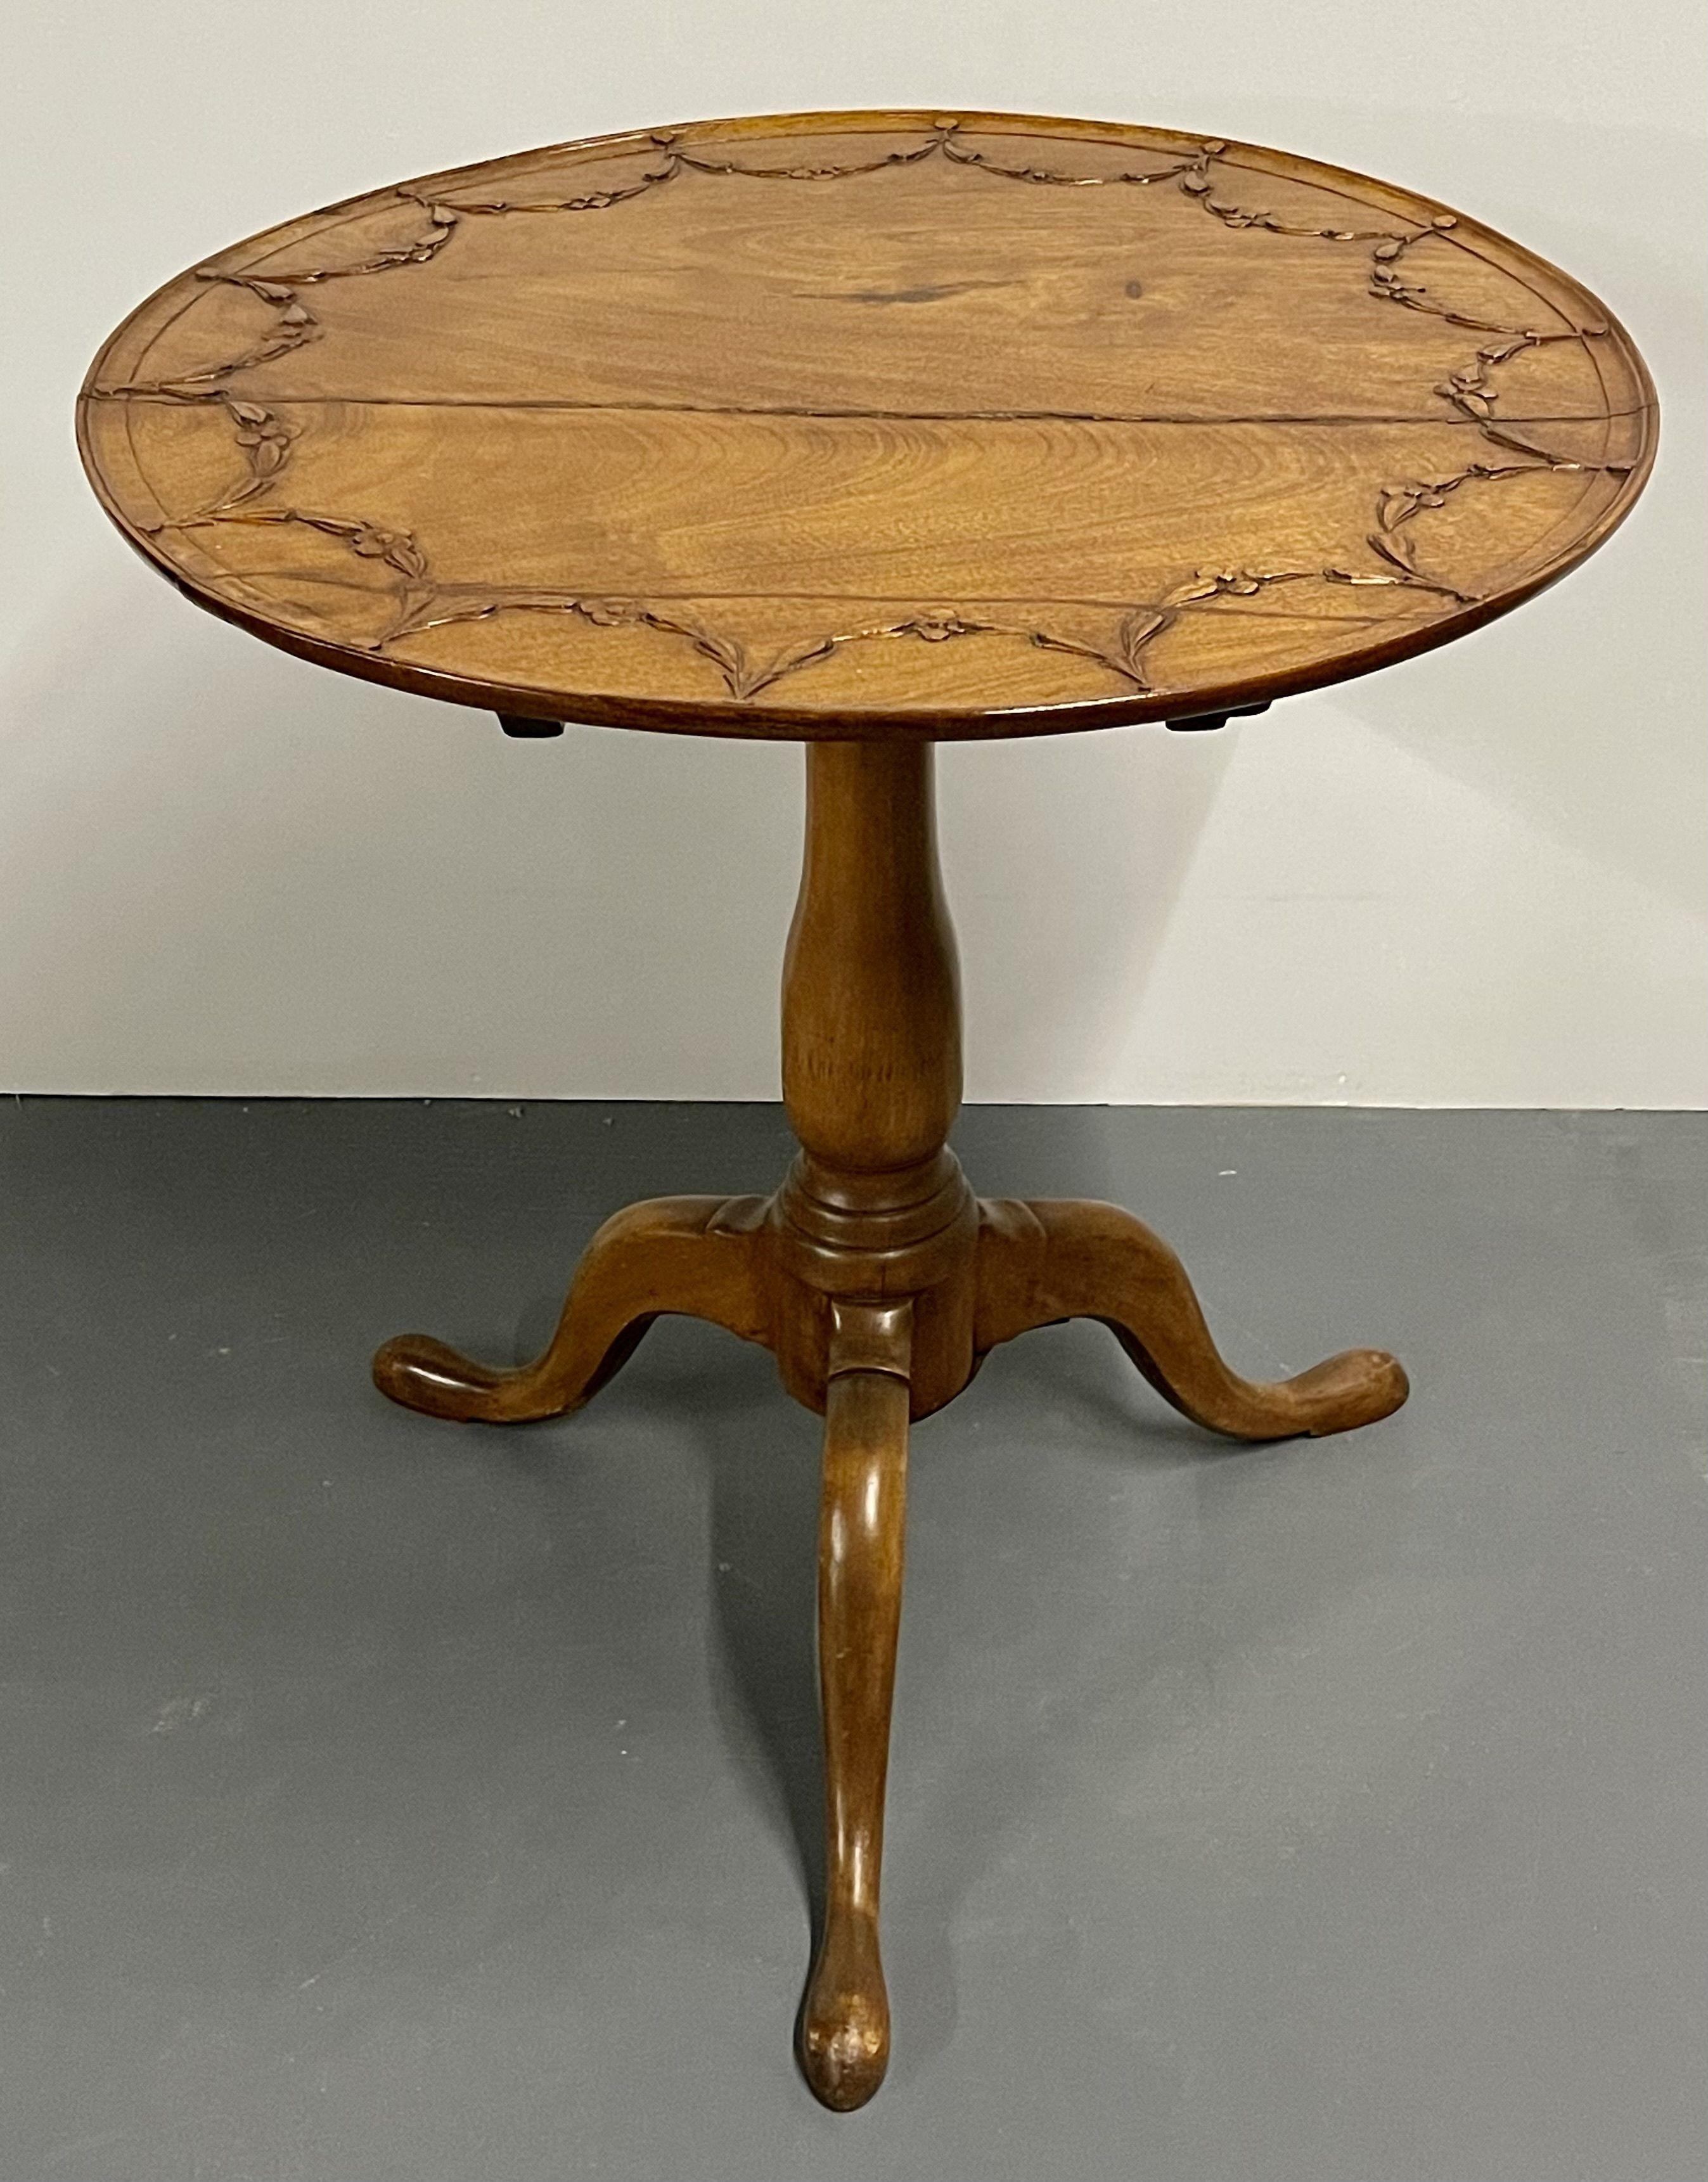 A fine 19th century pie crust tilt top table having solid wood carved construction in the Queen Anne Style. Age split across the top of the table.